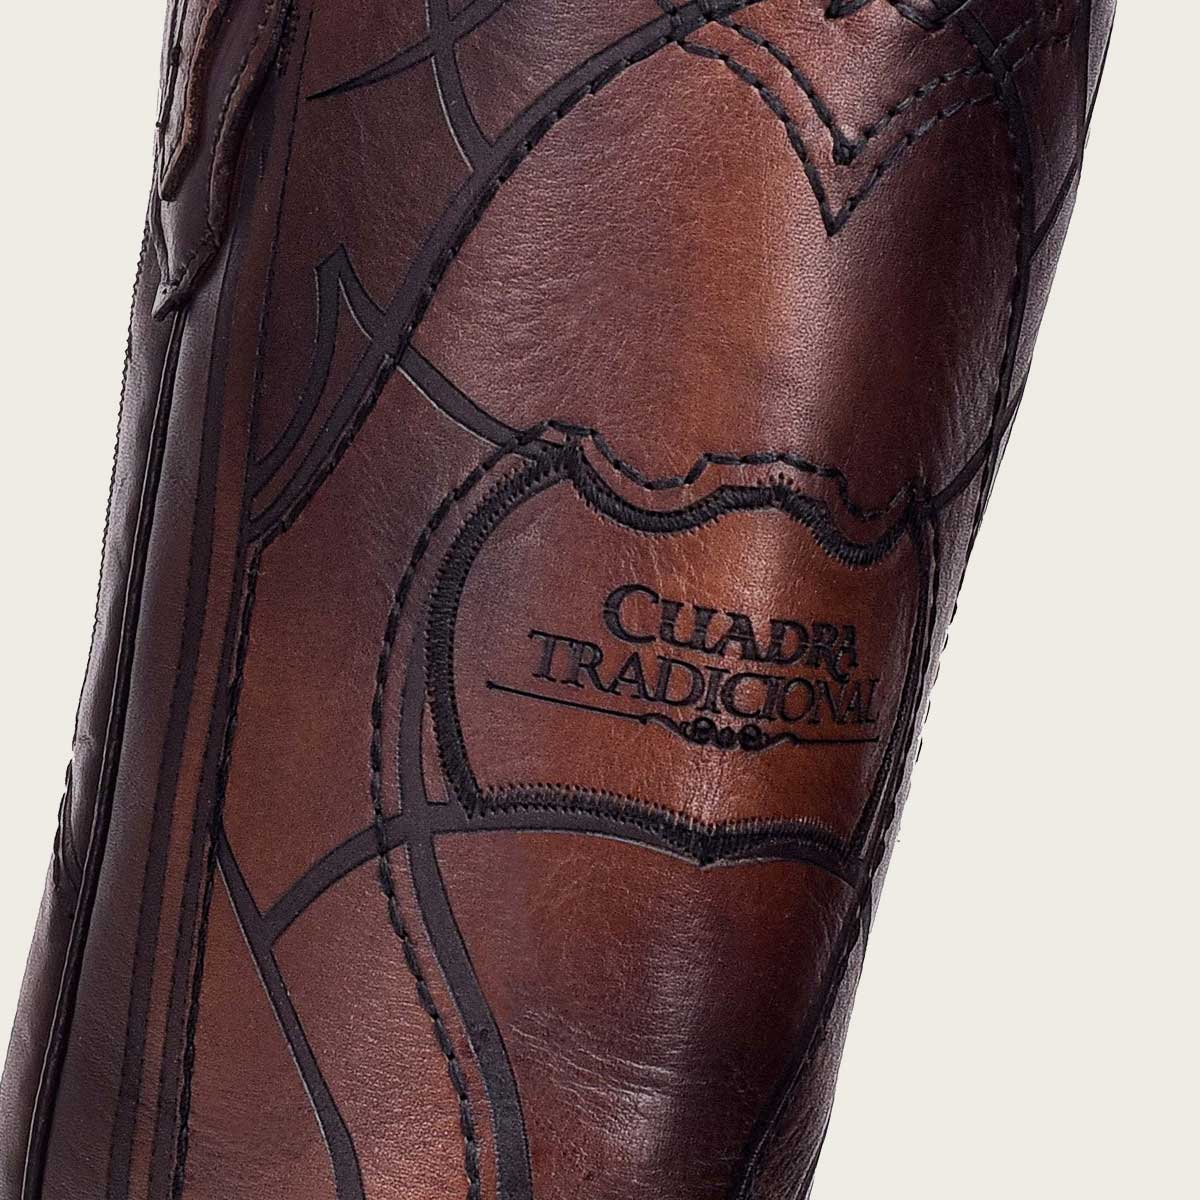 The superior craftsmanship guarantees long-lasting performance and support, making these boots a reliable companion for your everyday adventures.